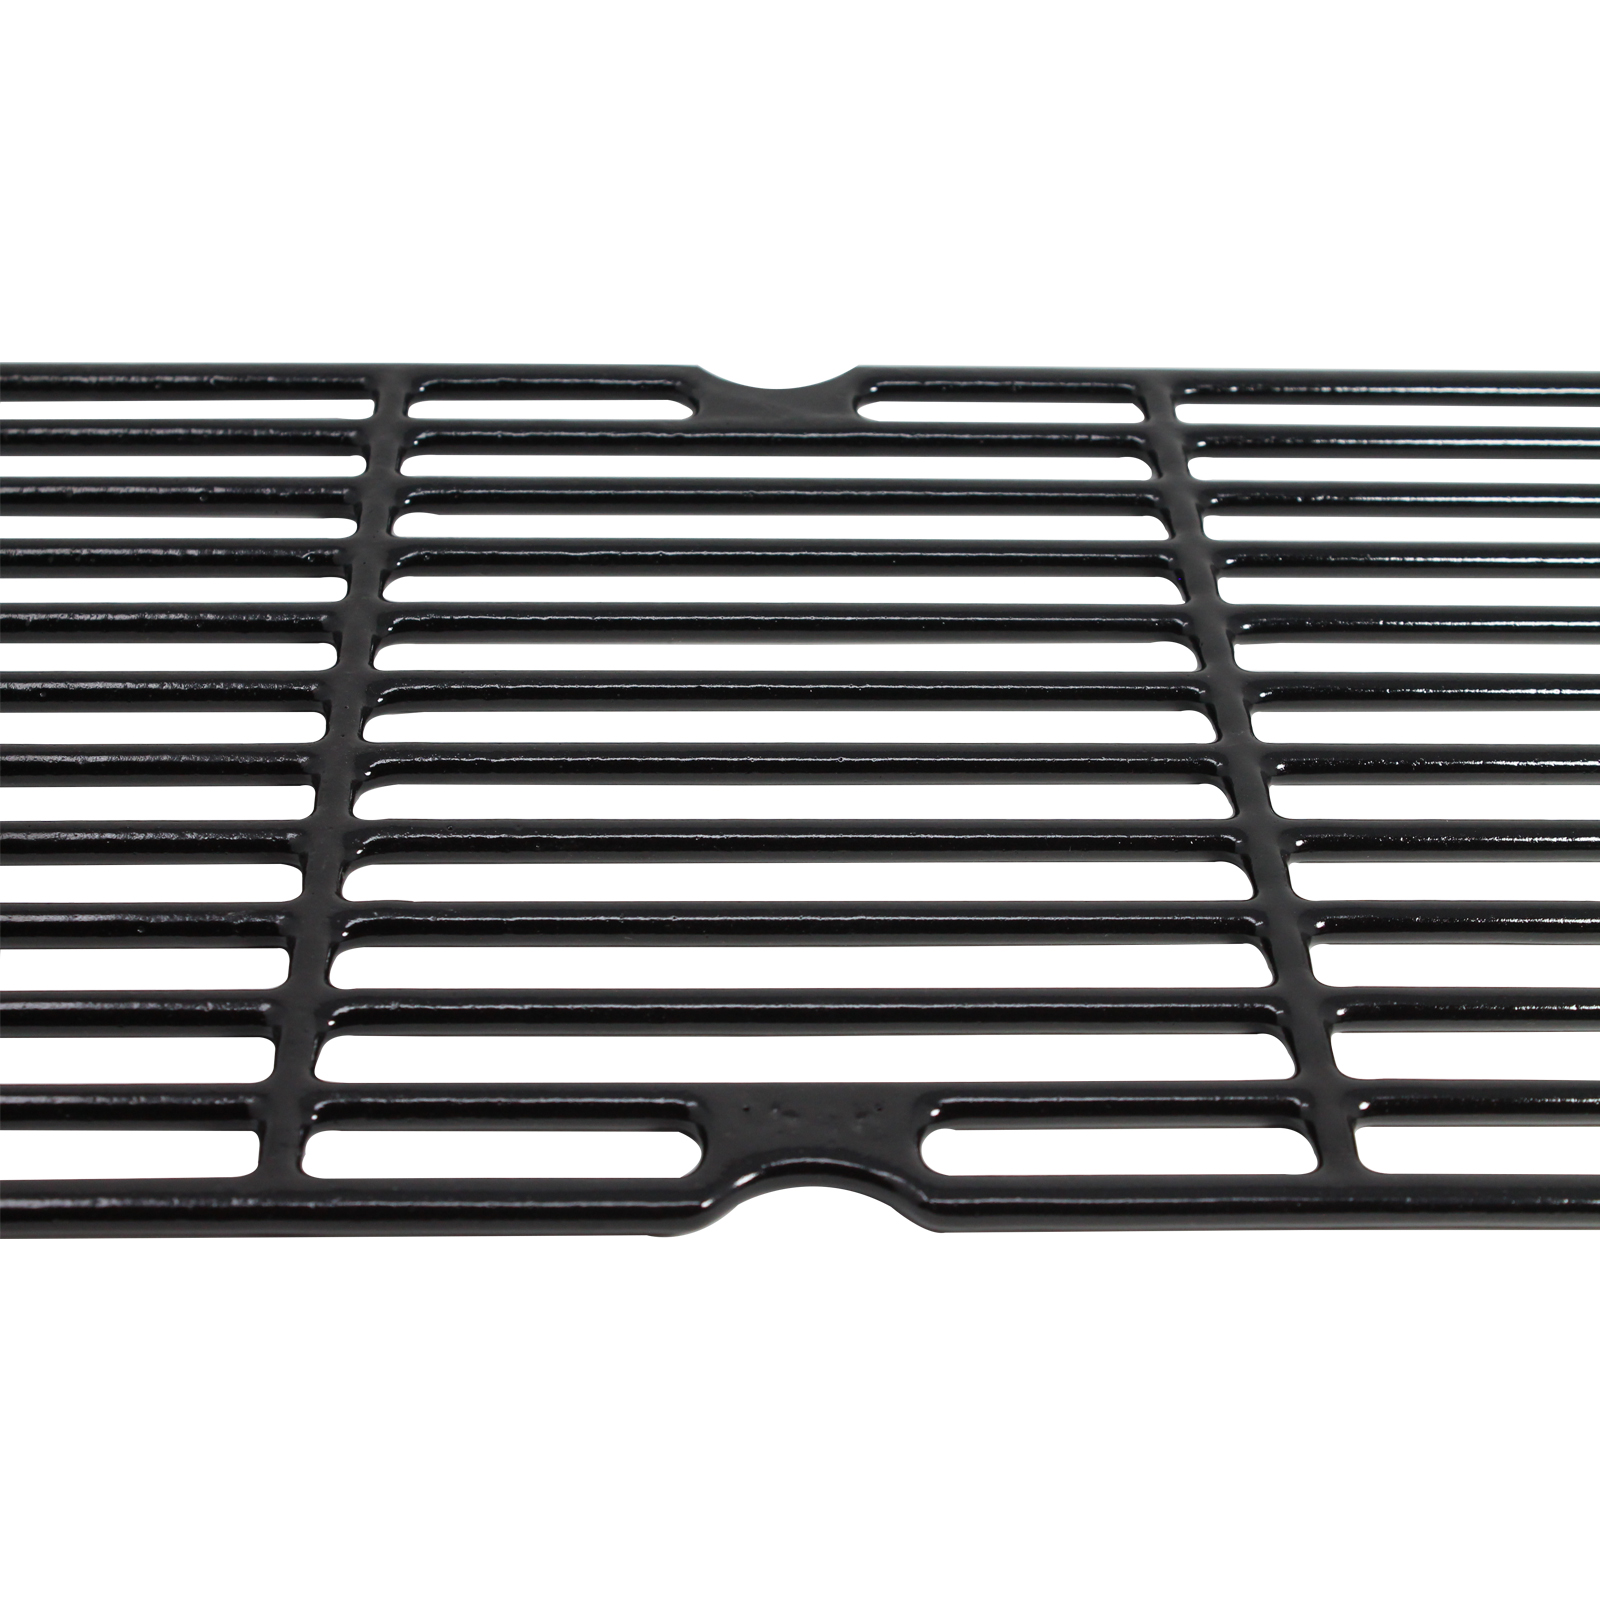 BBQ Grill Cooking Grates Replacement Parts for Kenmore 415.16114010 - Compatible Barbeque Cast Iron Grid 16 3/4" - image 3 of 4